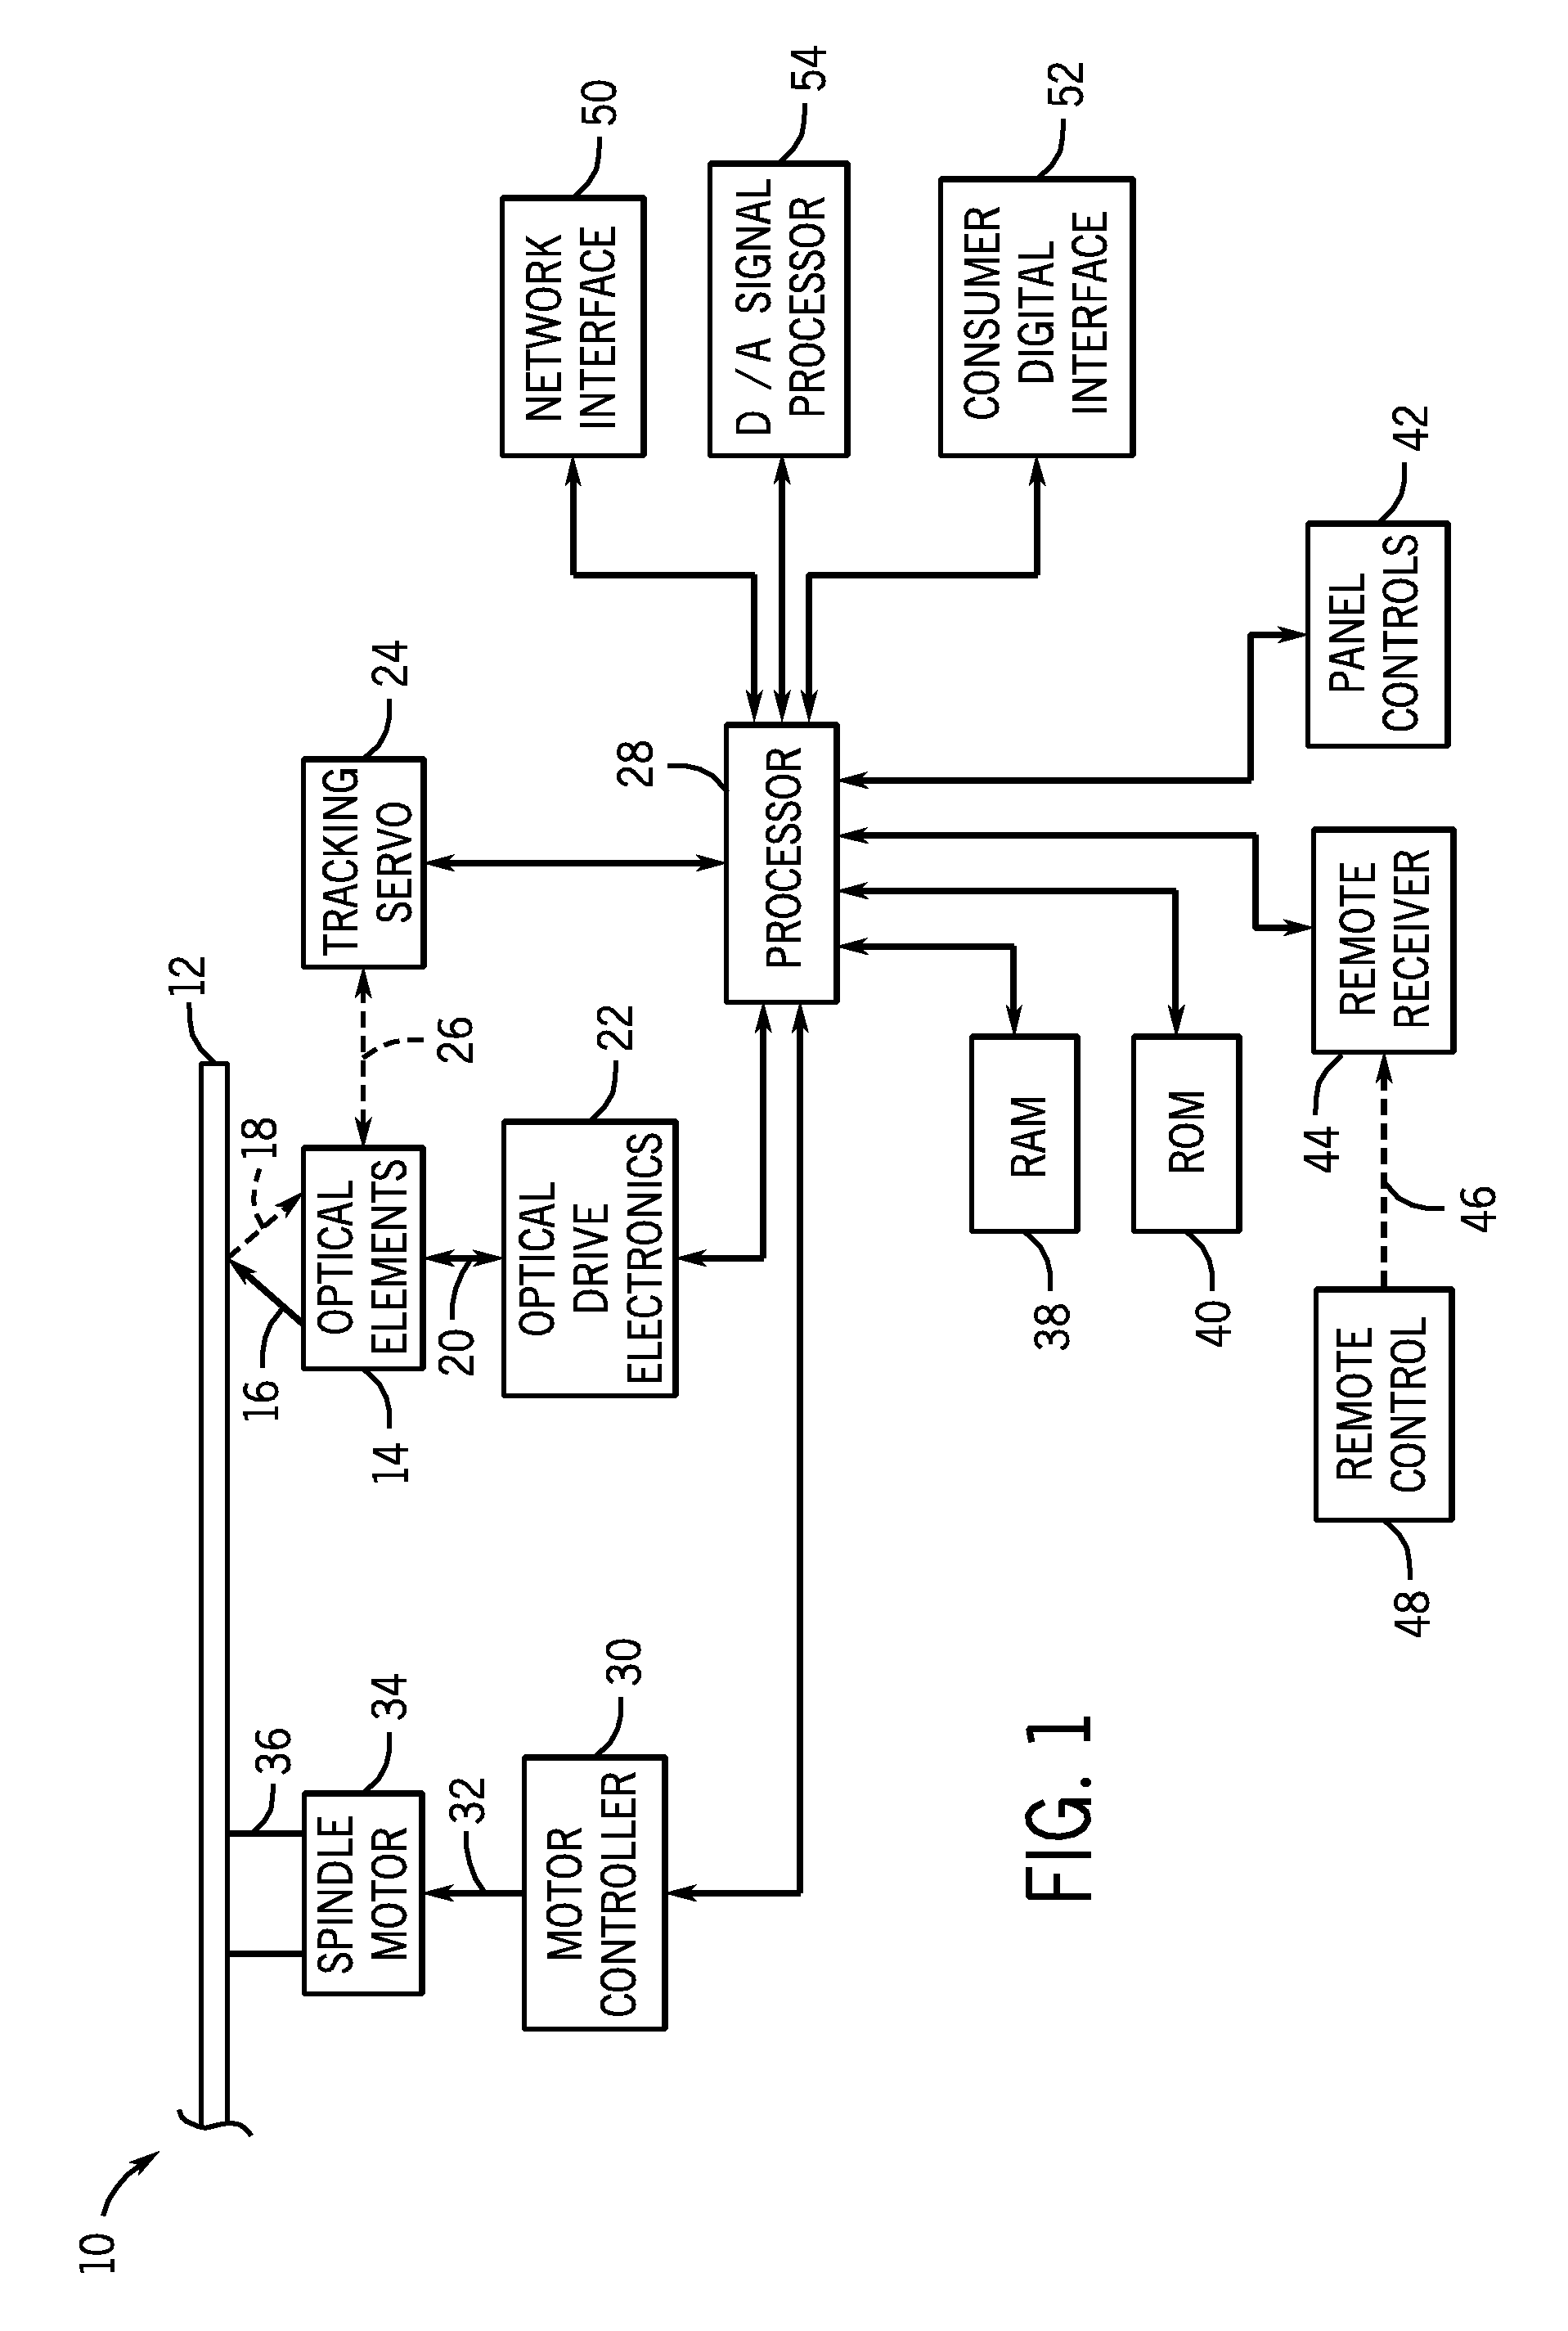 System and method for storage of data in circular data tracks on optical discs